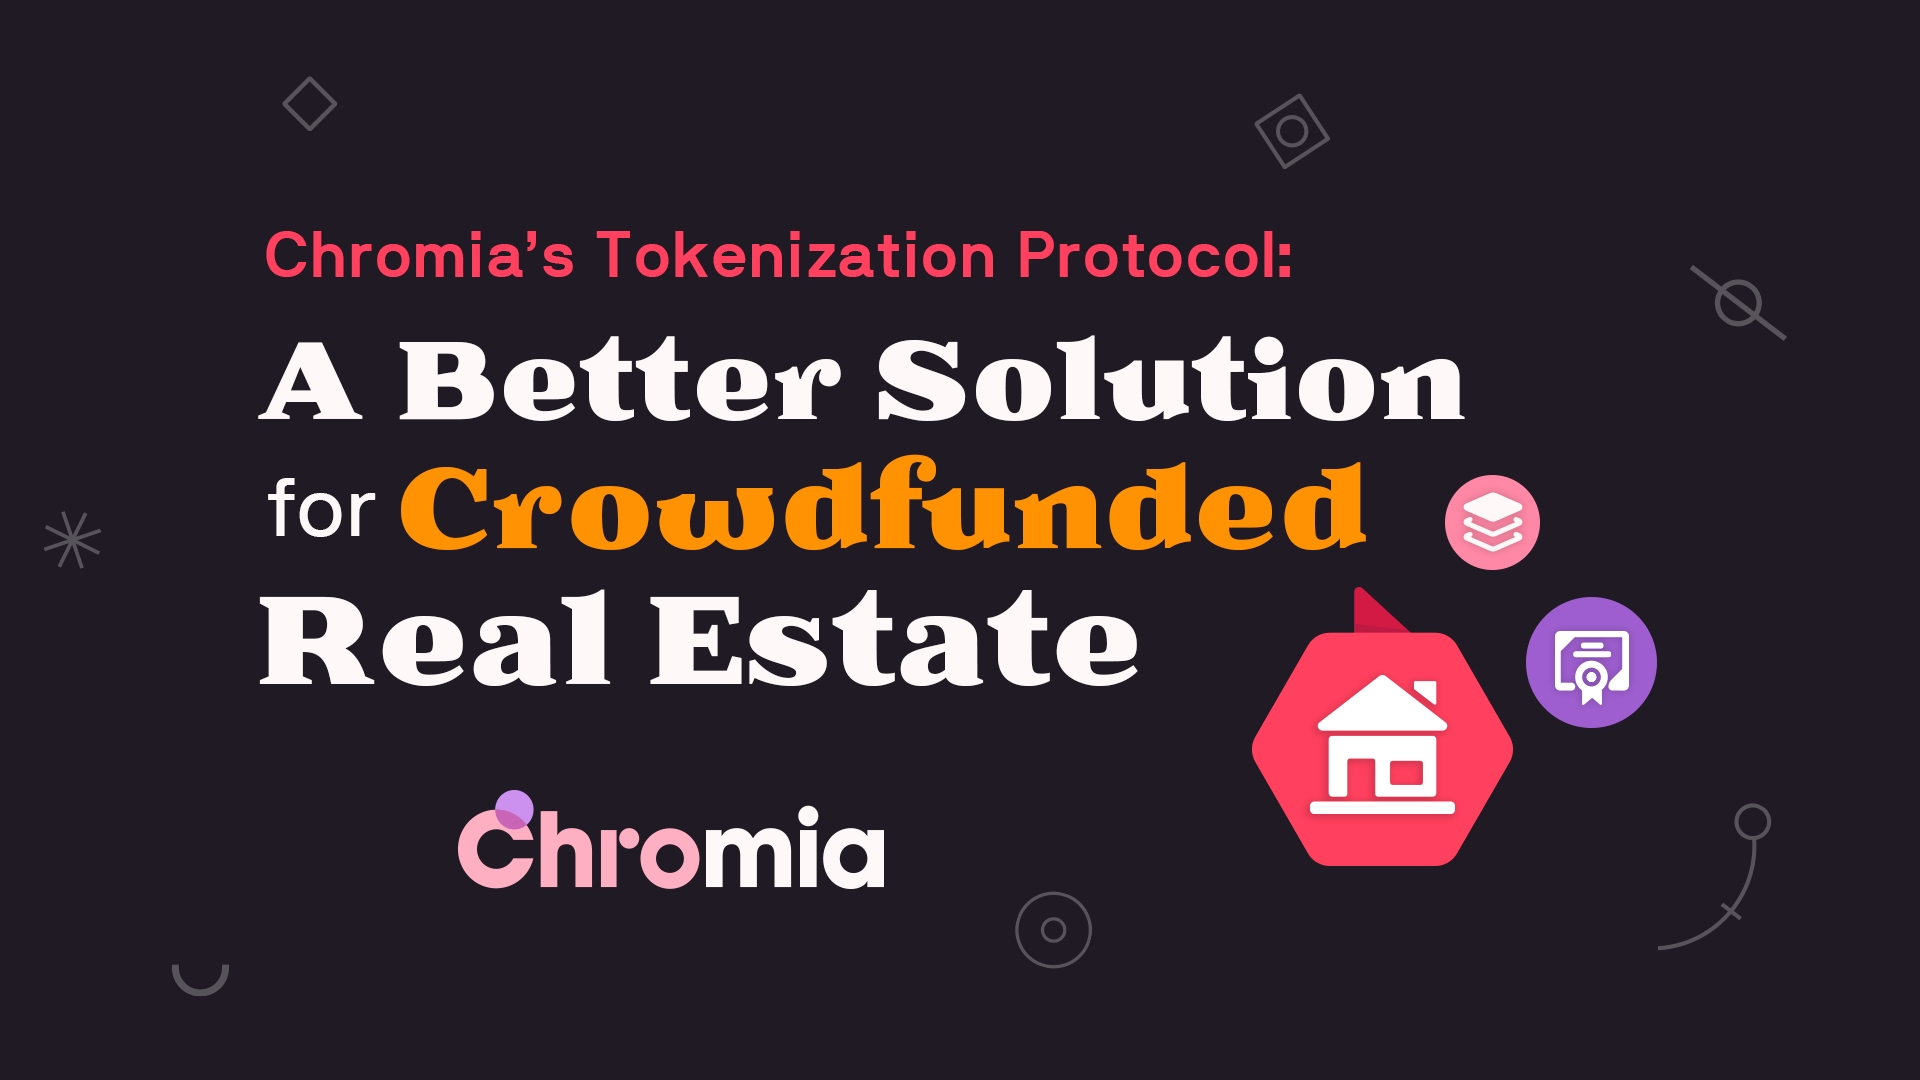 Chromia’s Tokenization Protocol: A Better Solution for Crowdfunded Real Estate